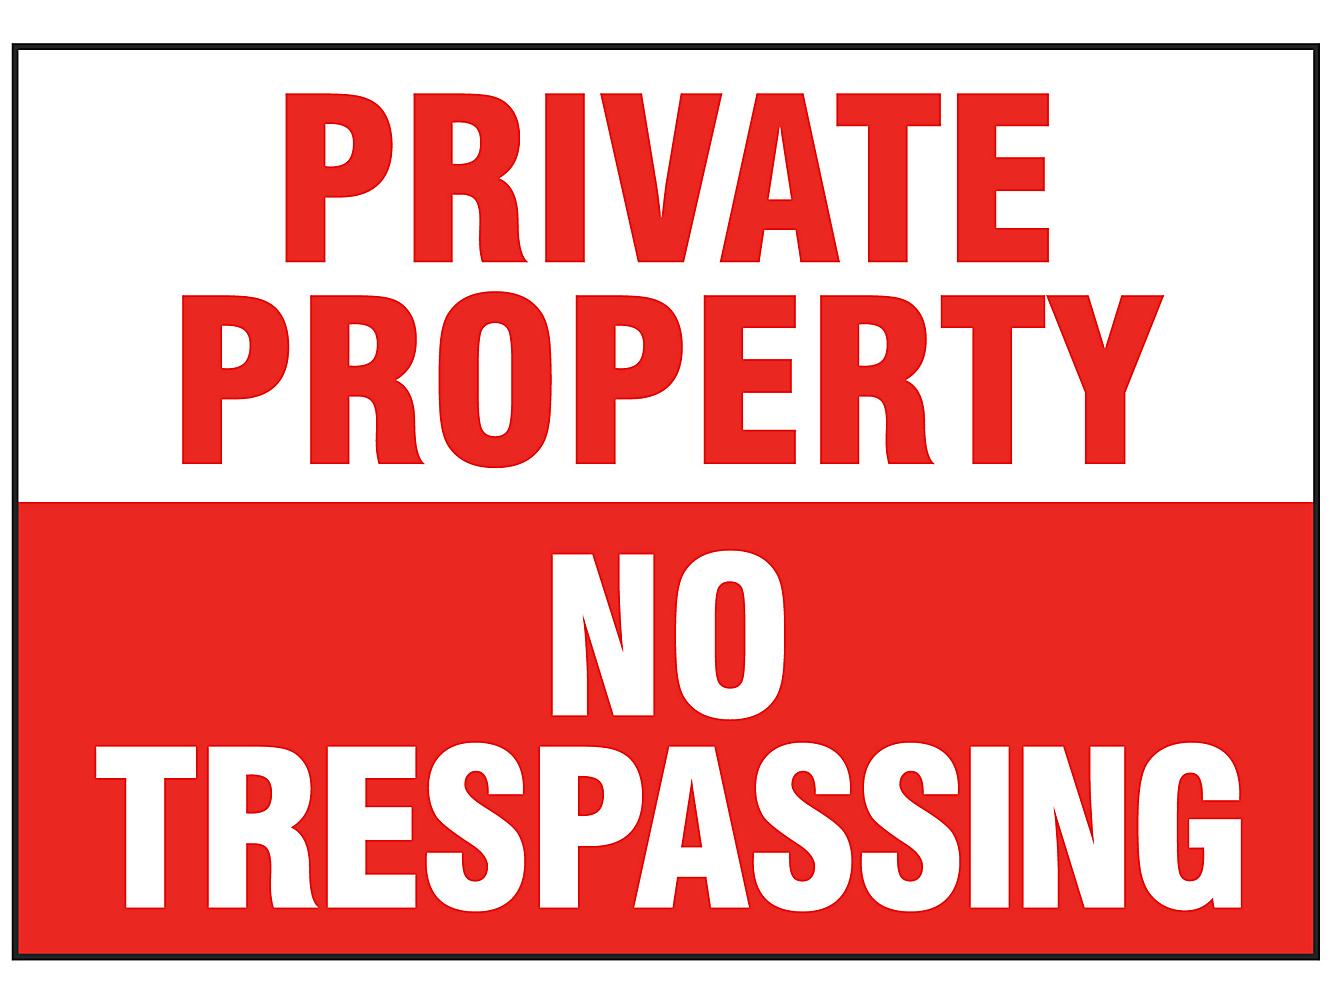 PRIVATE PROPERTY NO TRESPASSING Sign Plastic Stickers Safety Signs Decal 20x15cm 